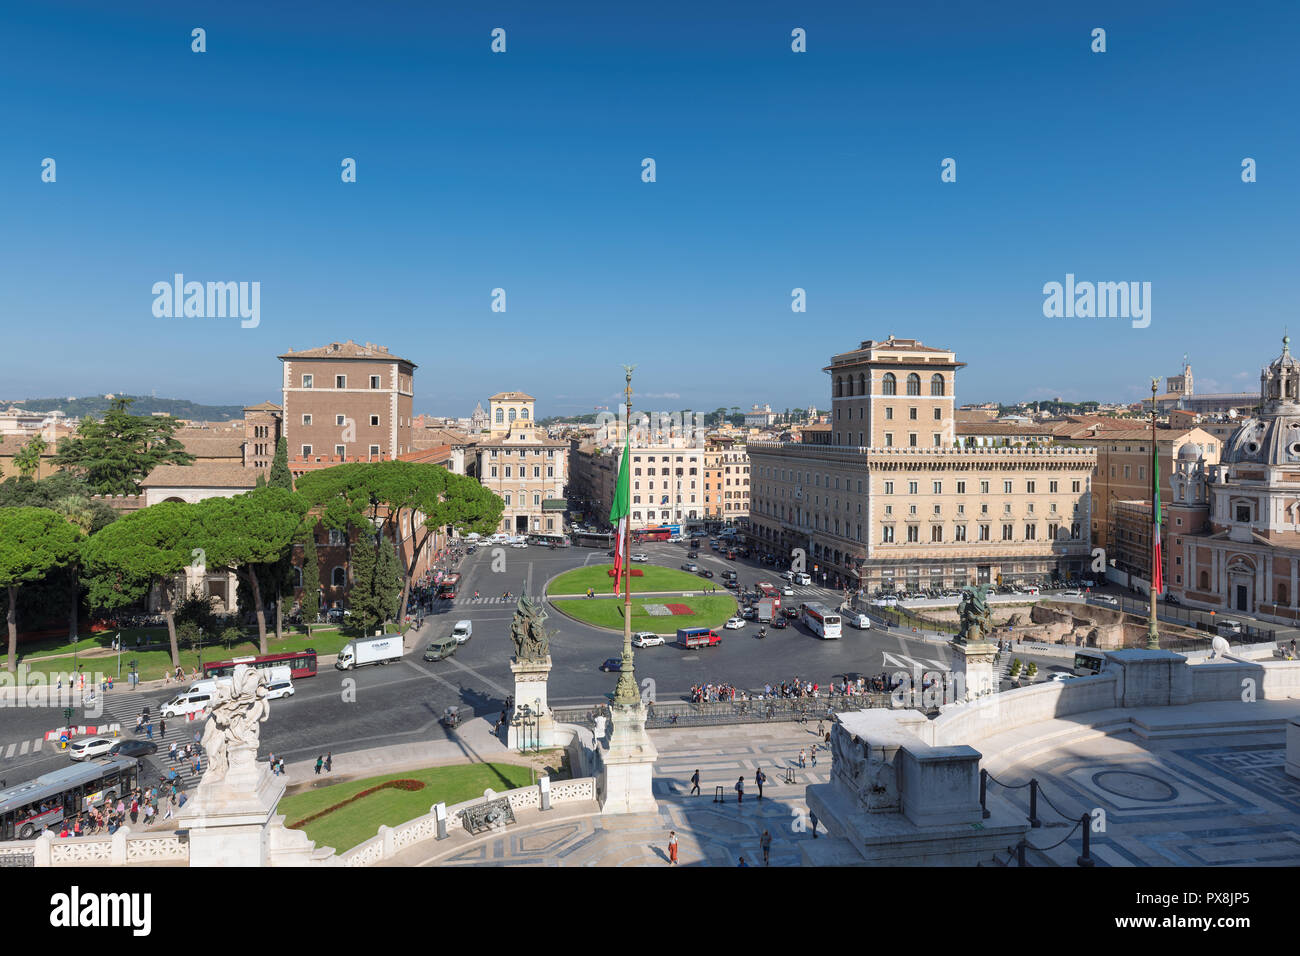 Aerial view of Piazza Venezia in sunny autumn day, Rome, Italy. Stock Photo